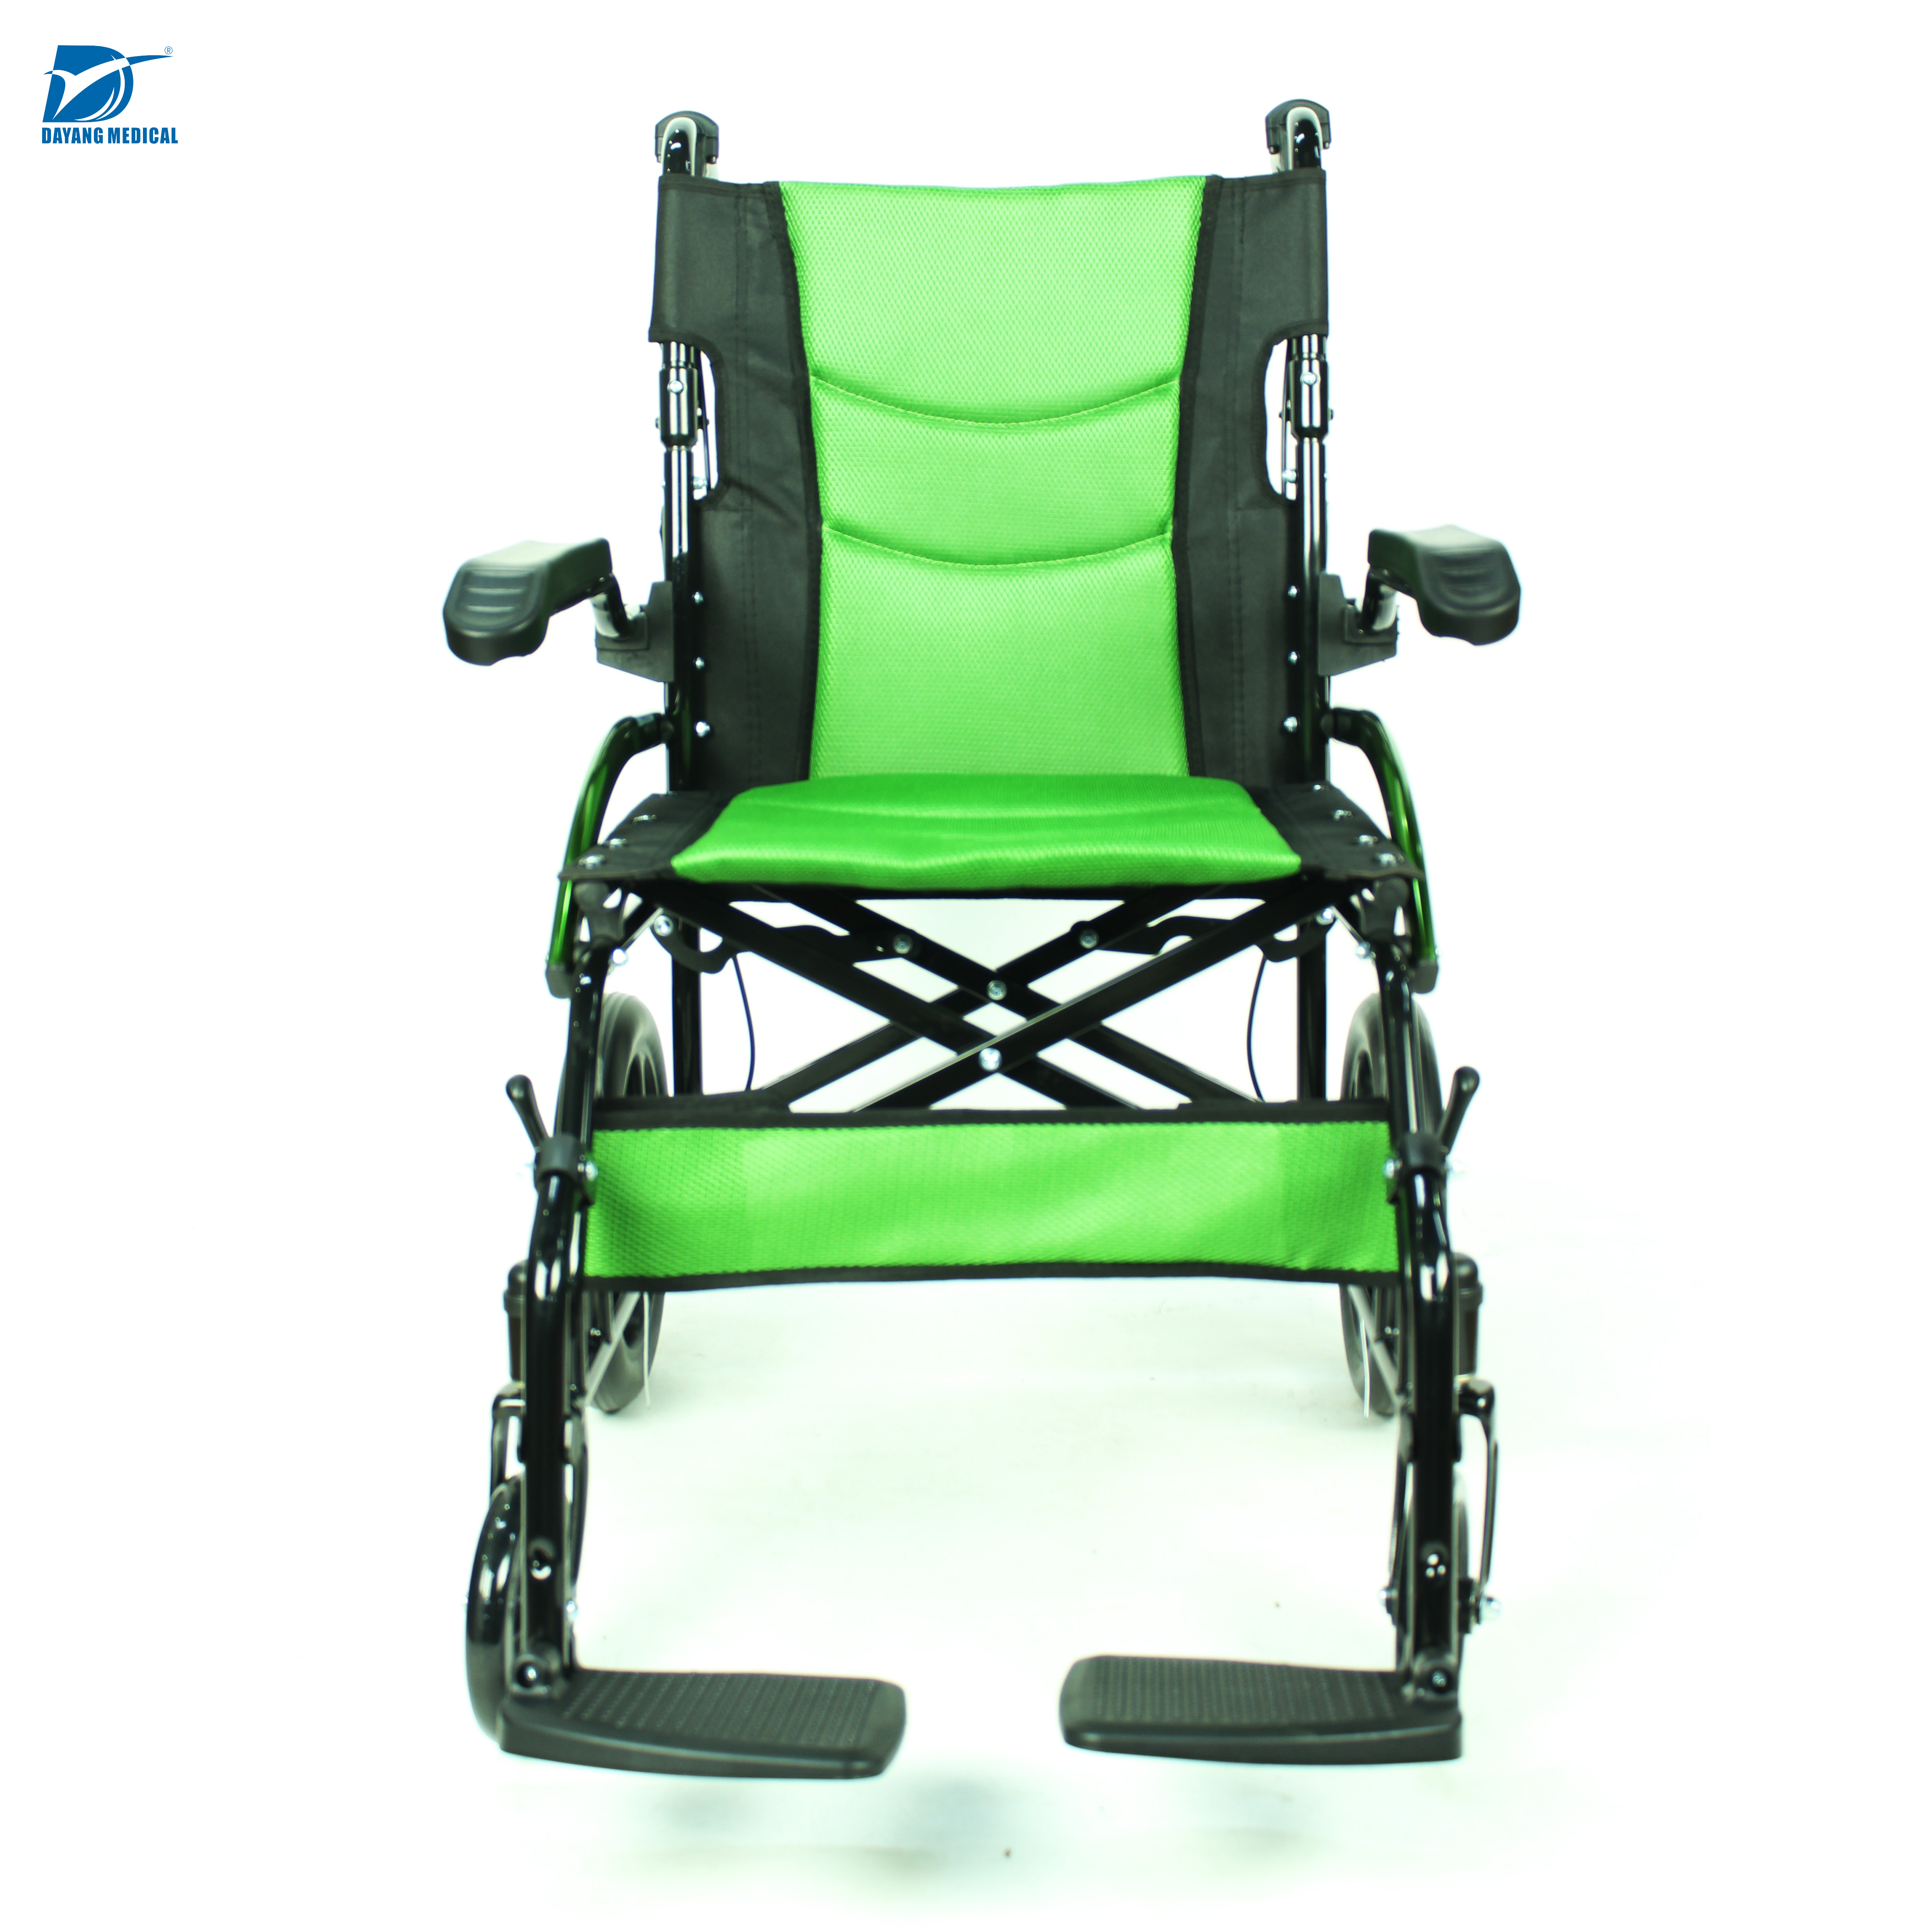 Physical Therapy Equipment good quality aluminum economical folding manual wheelchair